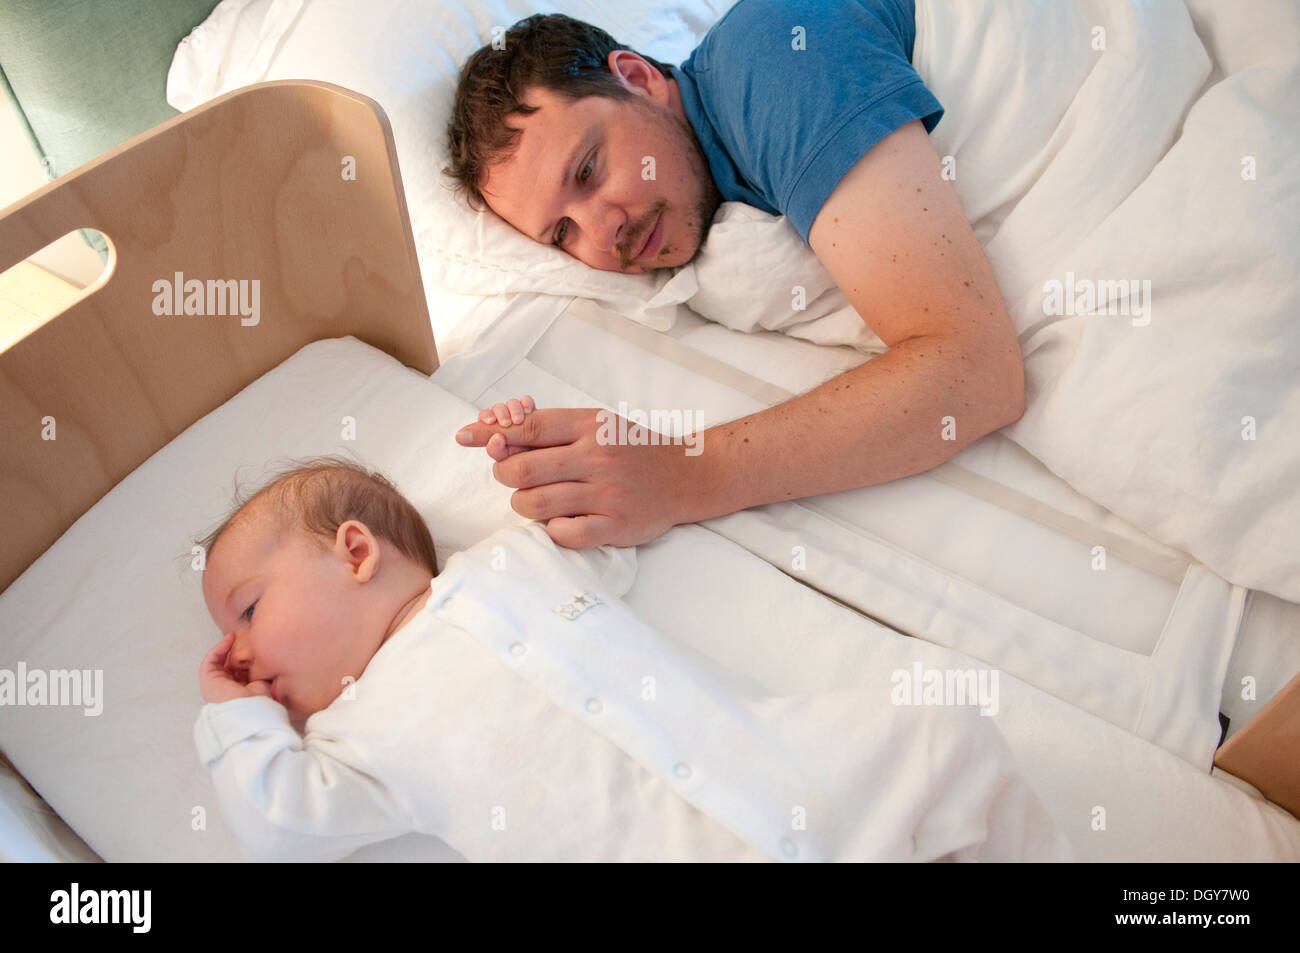 New father in bed comforting his little baby girl and holding her hand Stock Photo